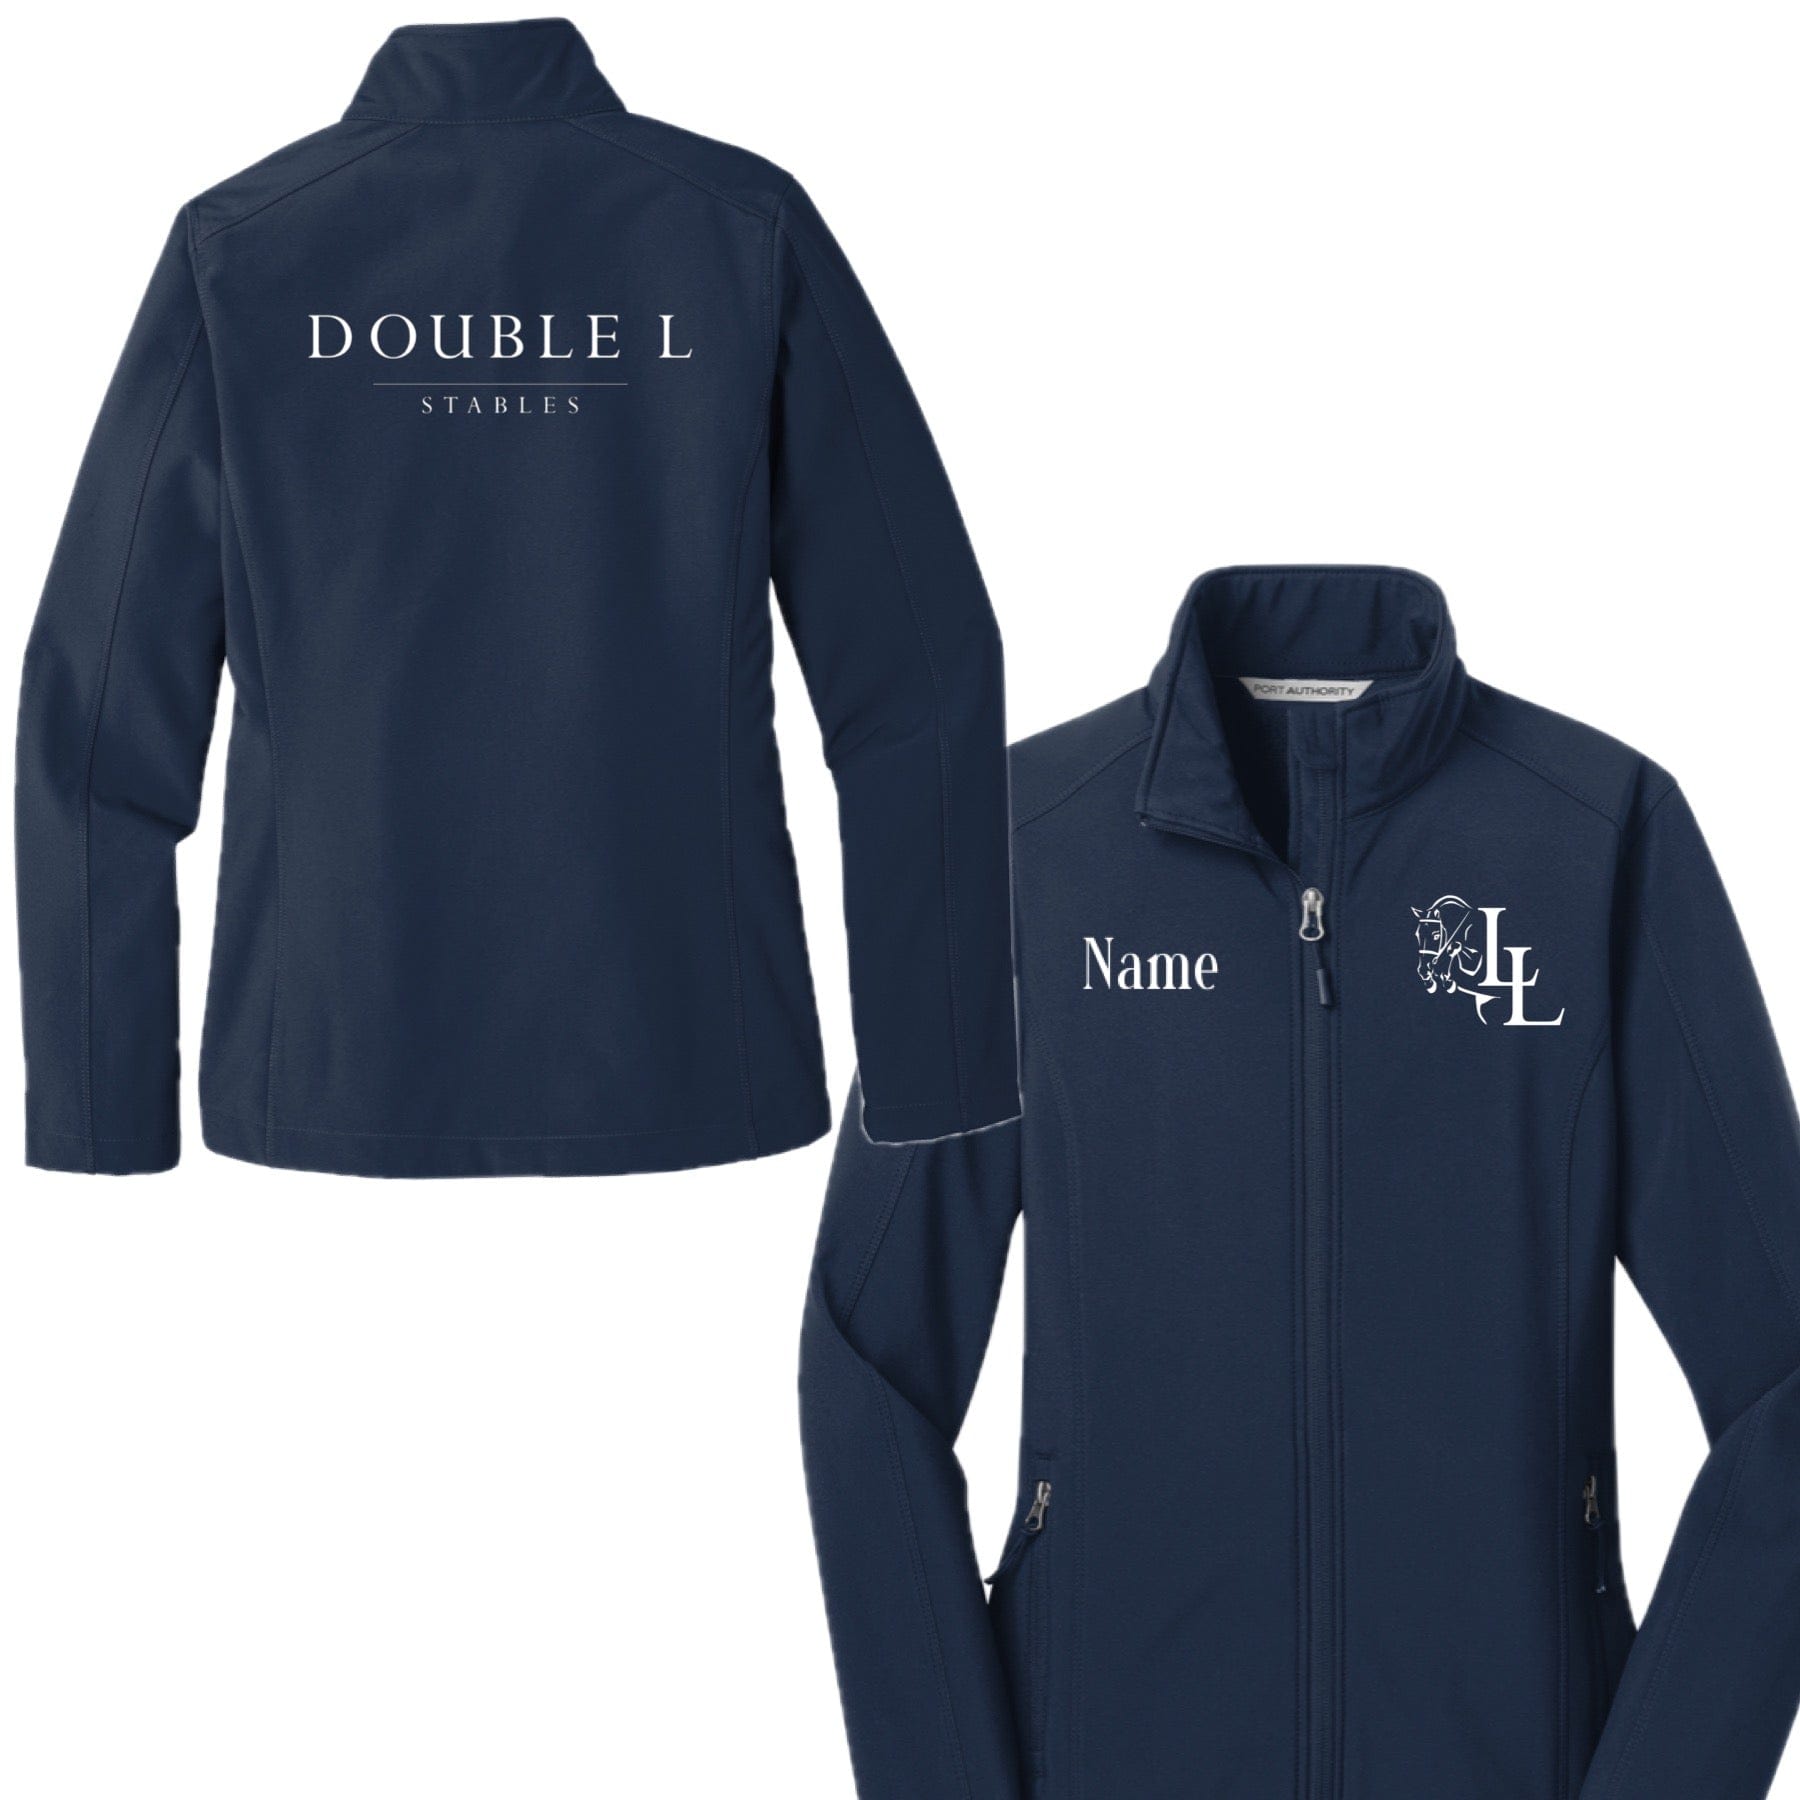 Equestrian Team Apparel Double L Stables Shell Jacket and Vest equestrian team apparel online tack store mobile tack store custom farm apparel custom show stable clothing equestrian lifestyle horse show clothing riding clothes horses equestrian tack store